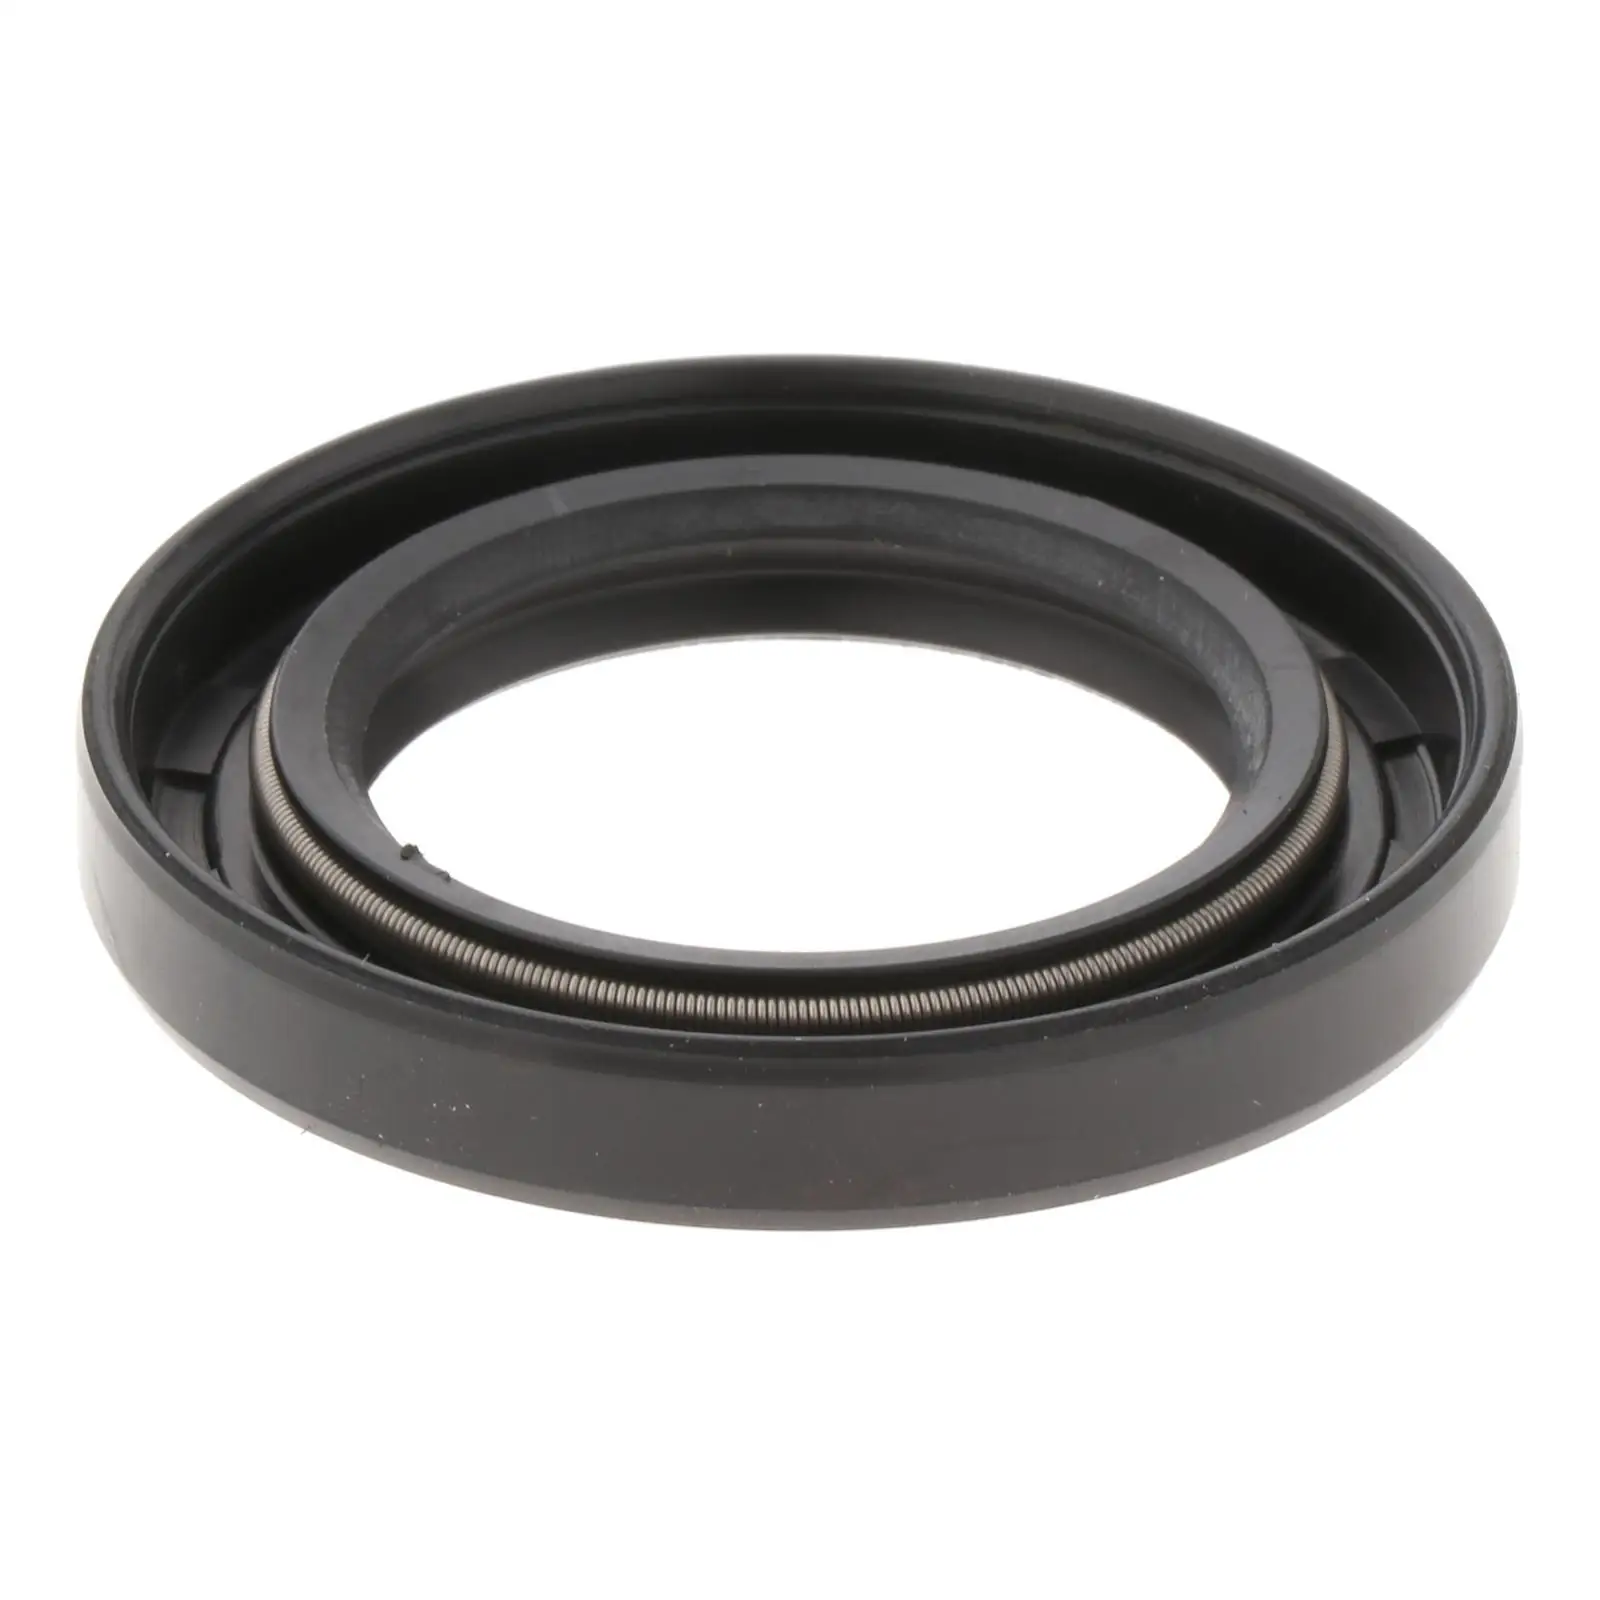 Oil Seal Fits for Yamaha Outboard Motor 2T 60HP-90HP Accessory Replacement